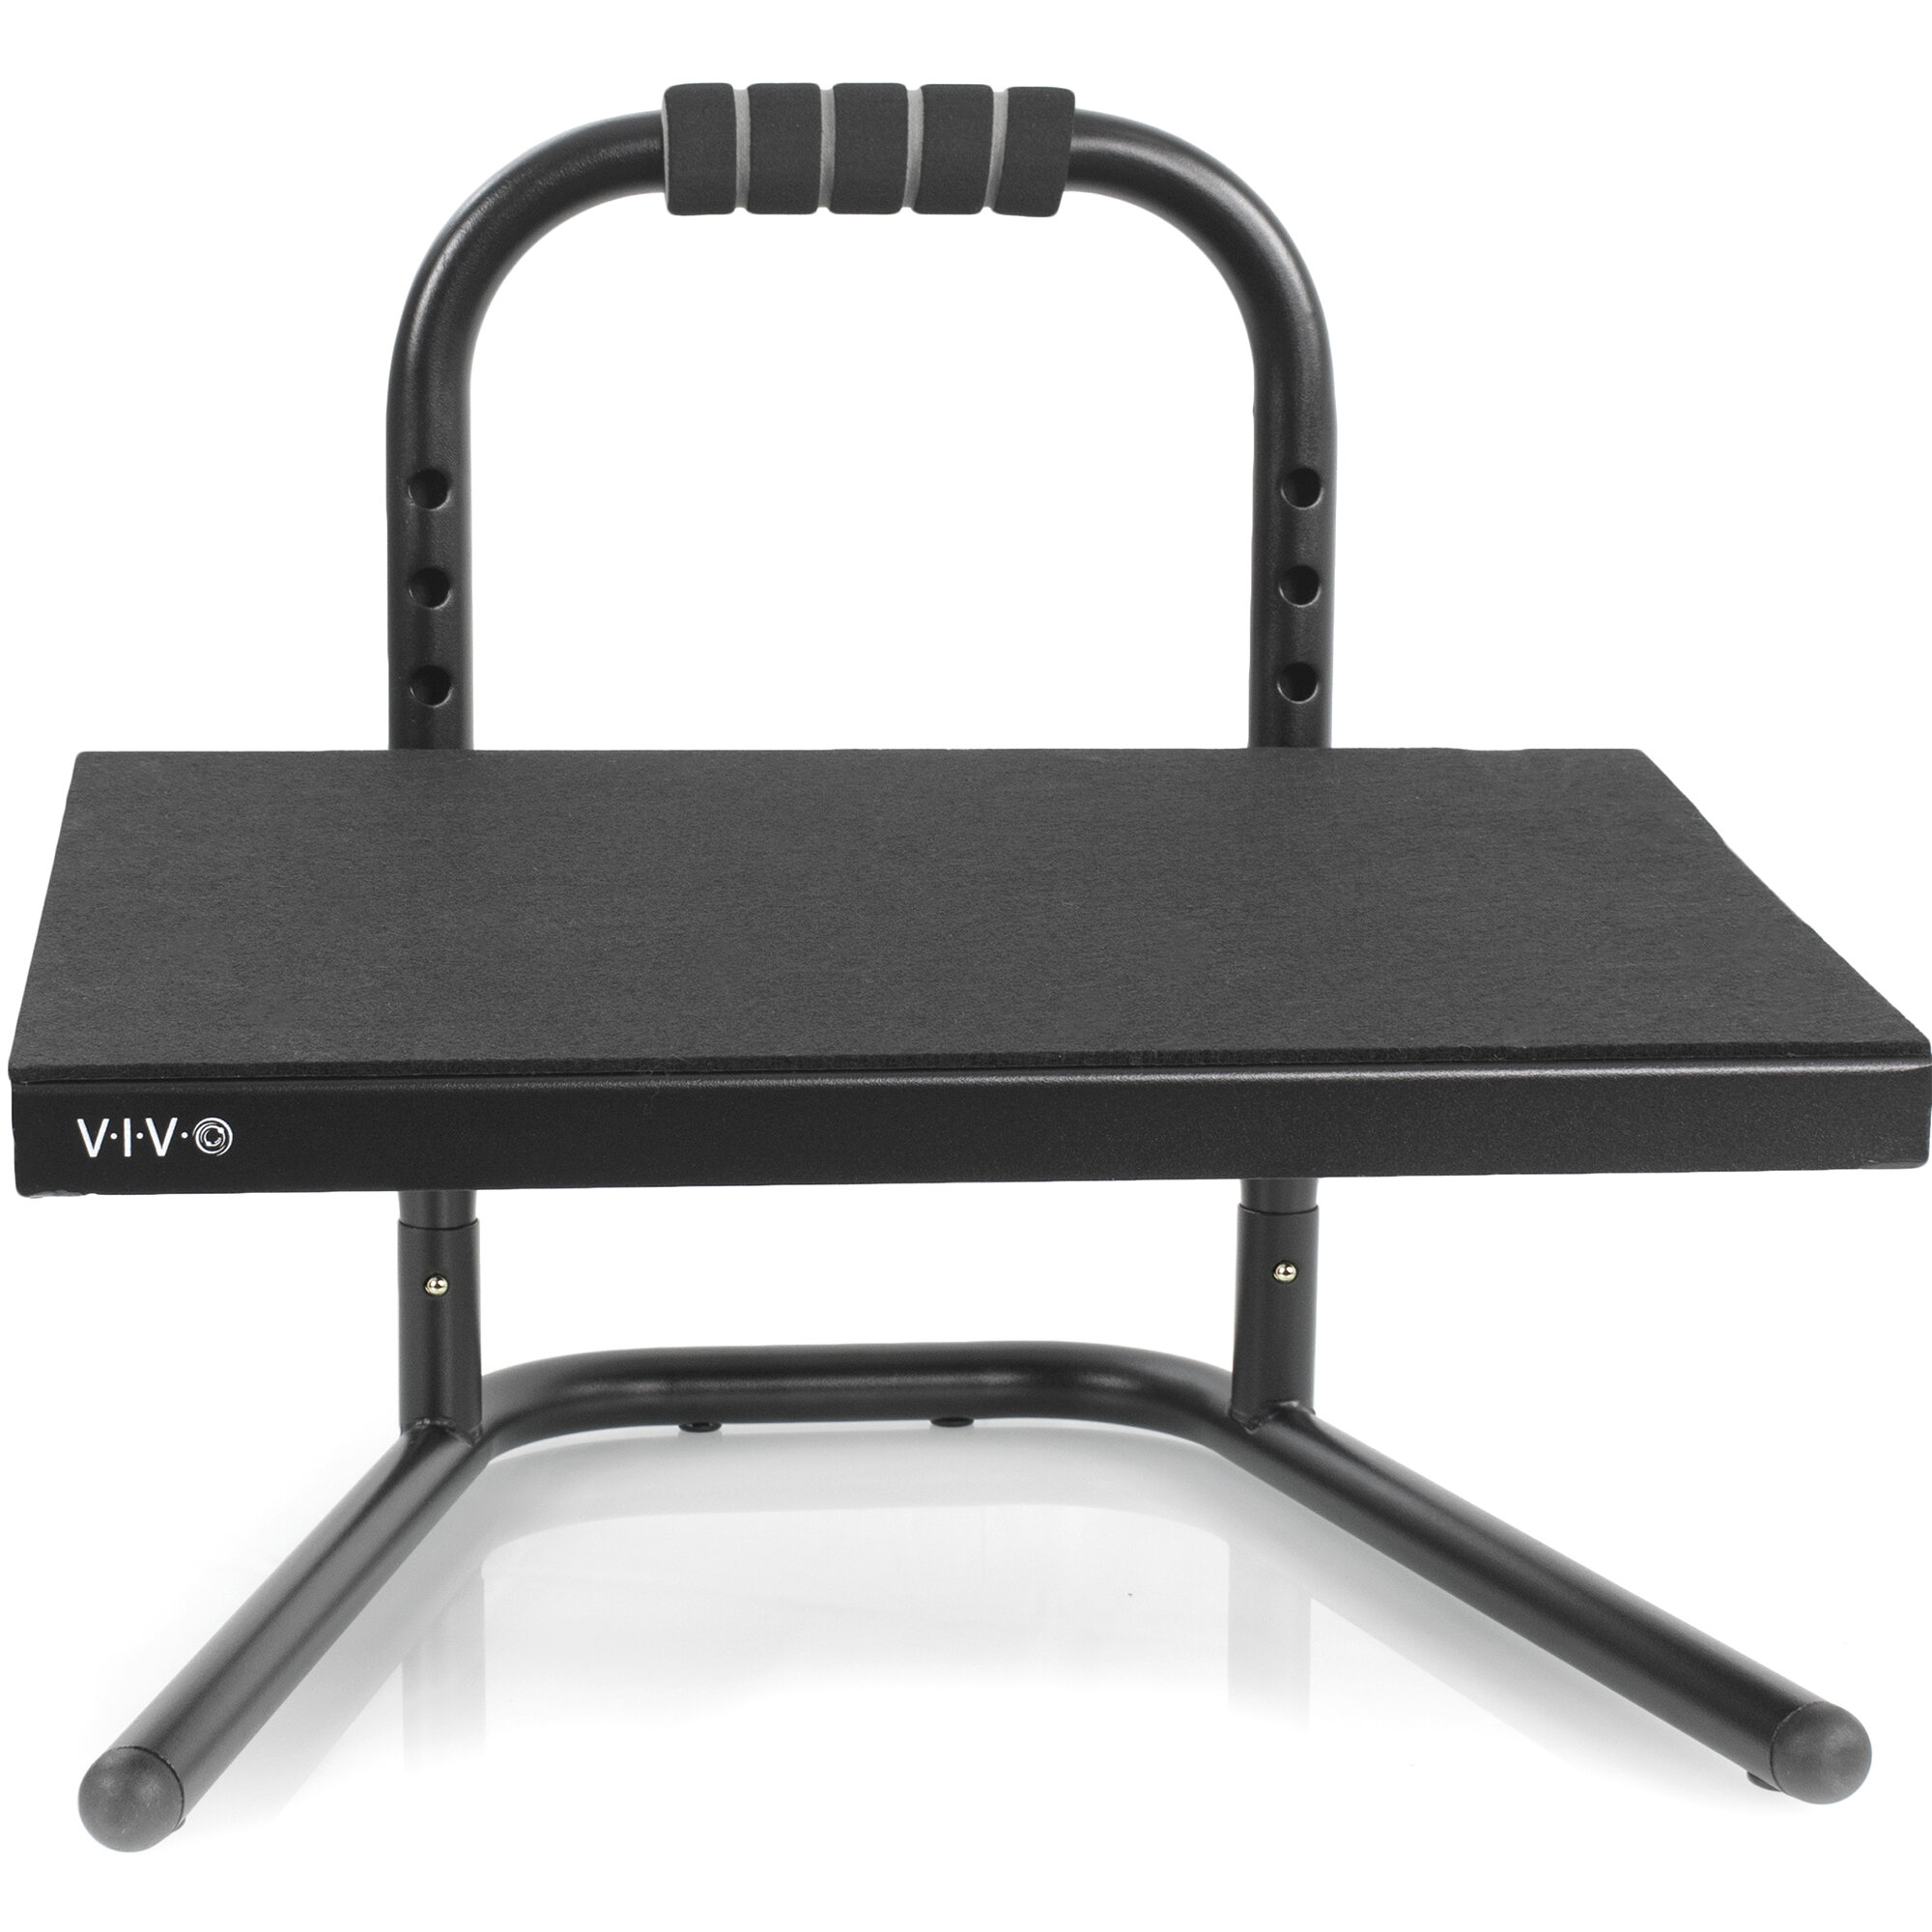 Mount-it! Footrest With Massaging Bead, Adjustable Height And Tilt Office Foot  Rest Stool For Under Desk Support